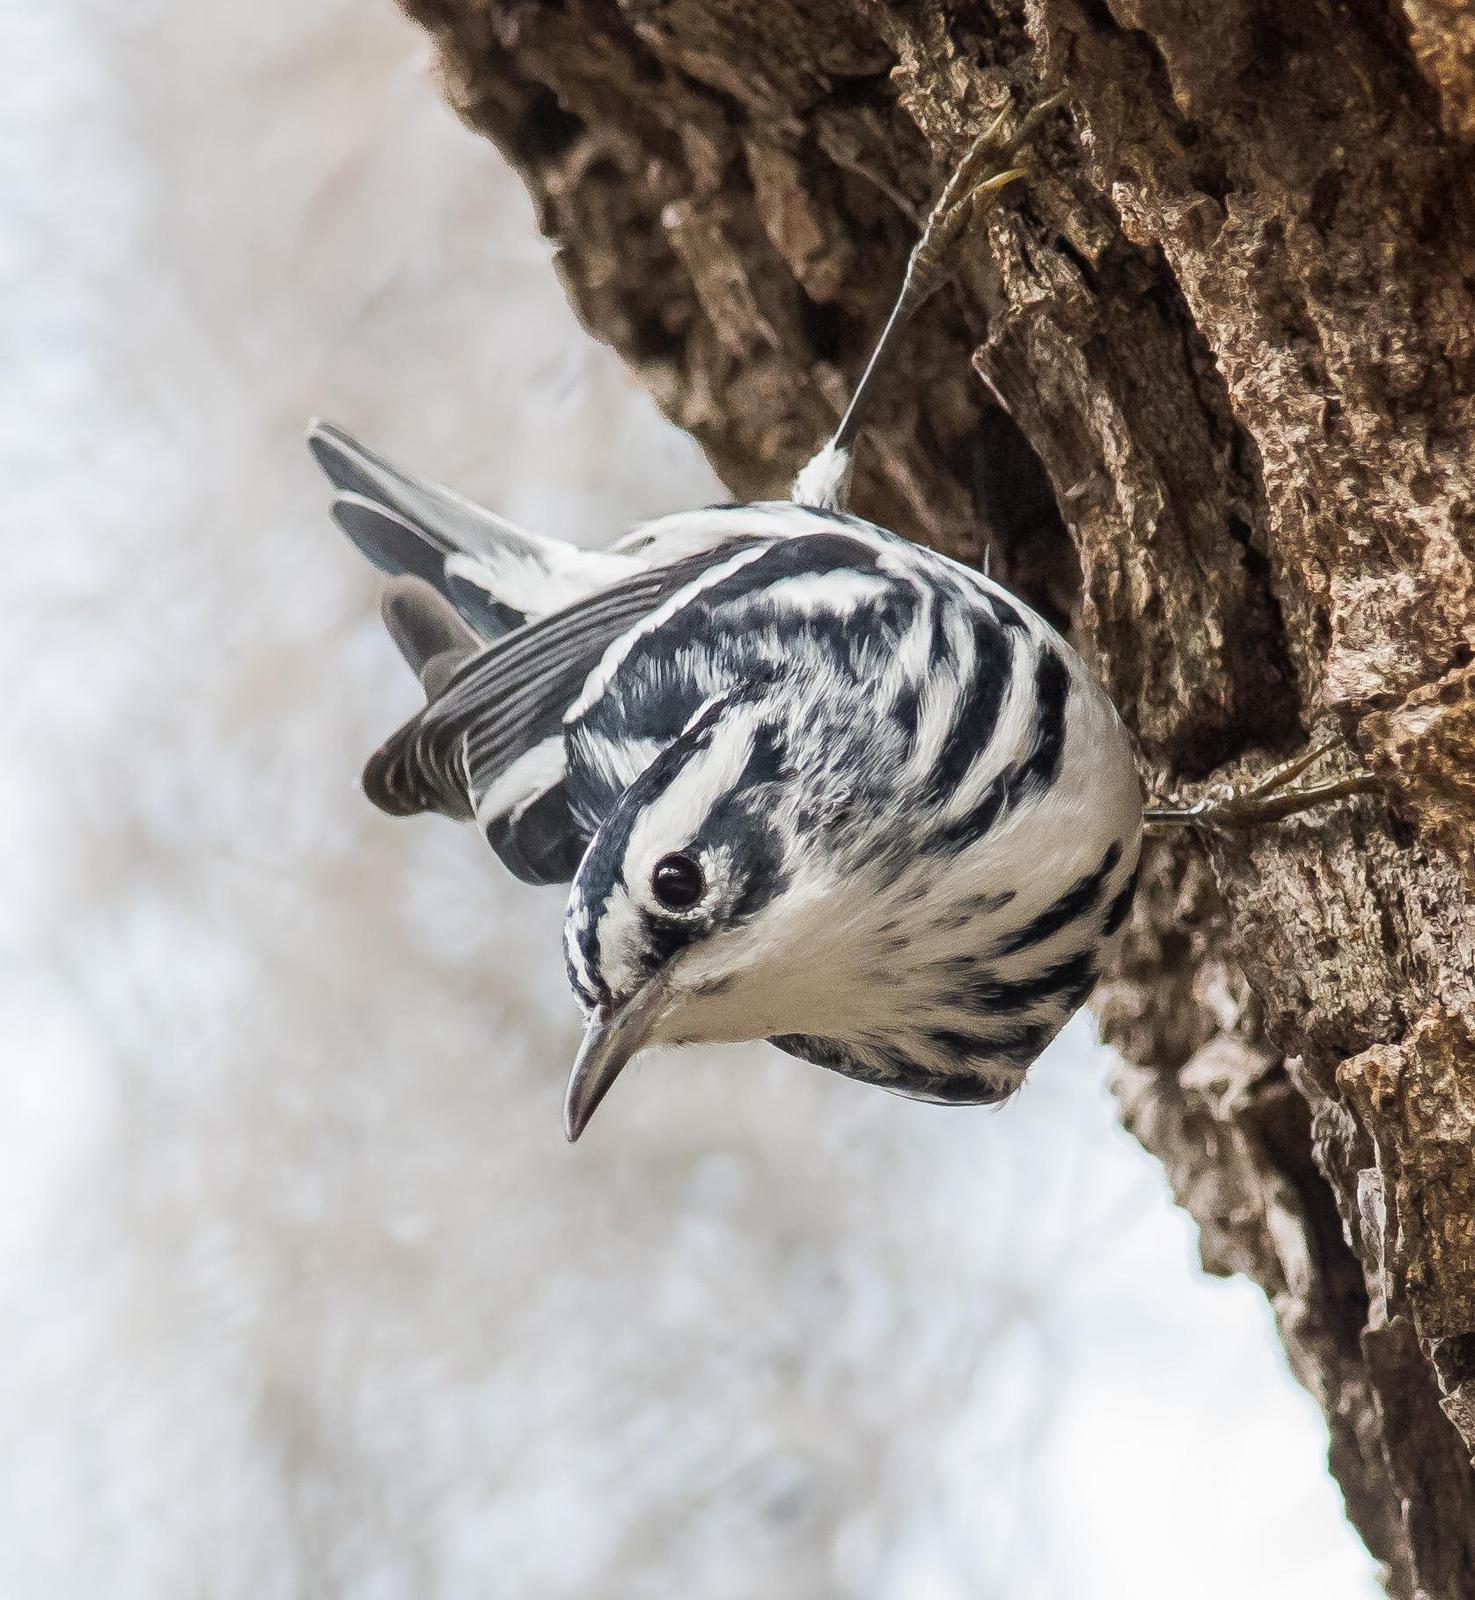 Black-and-white Warbler Photo by Georgia Wilson